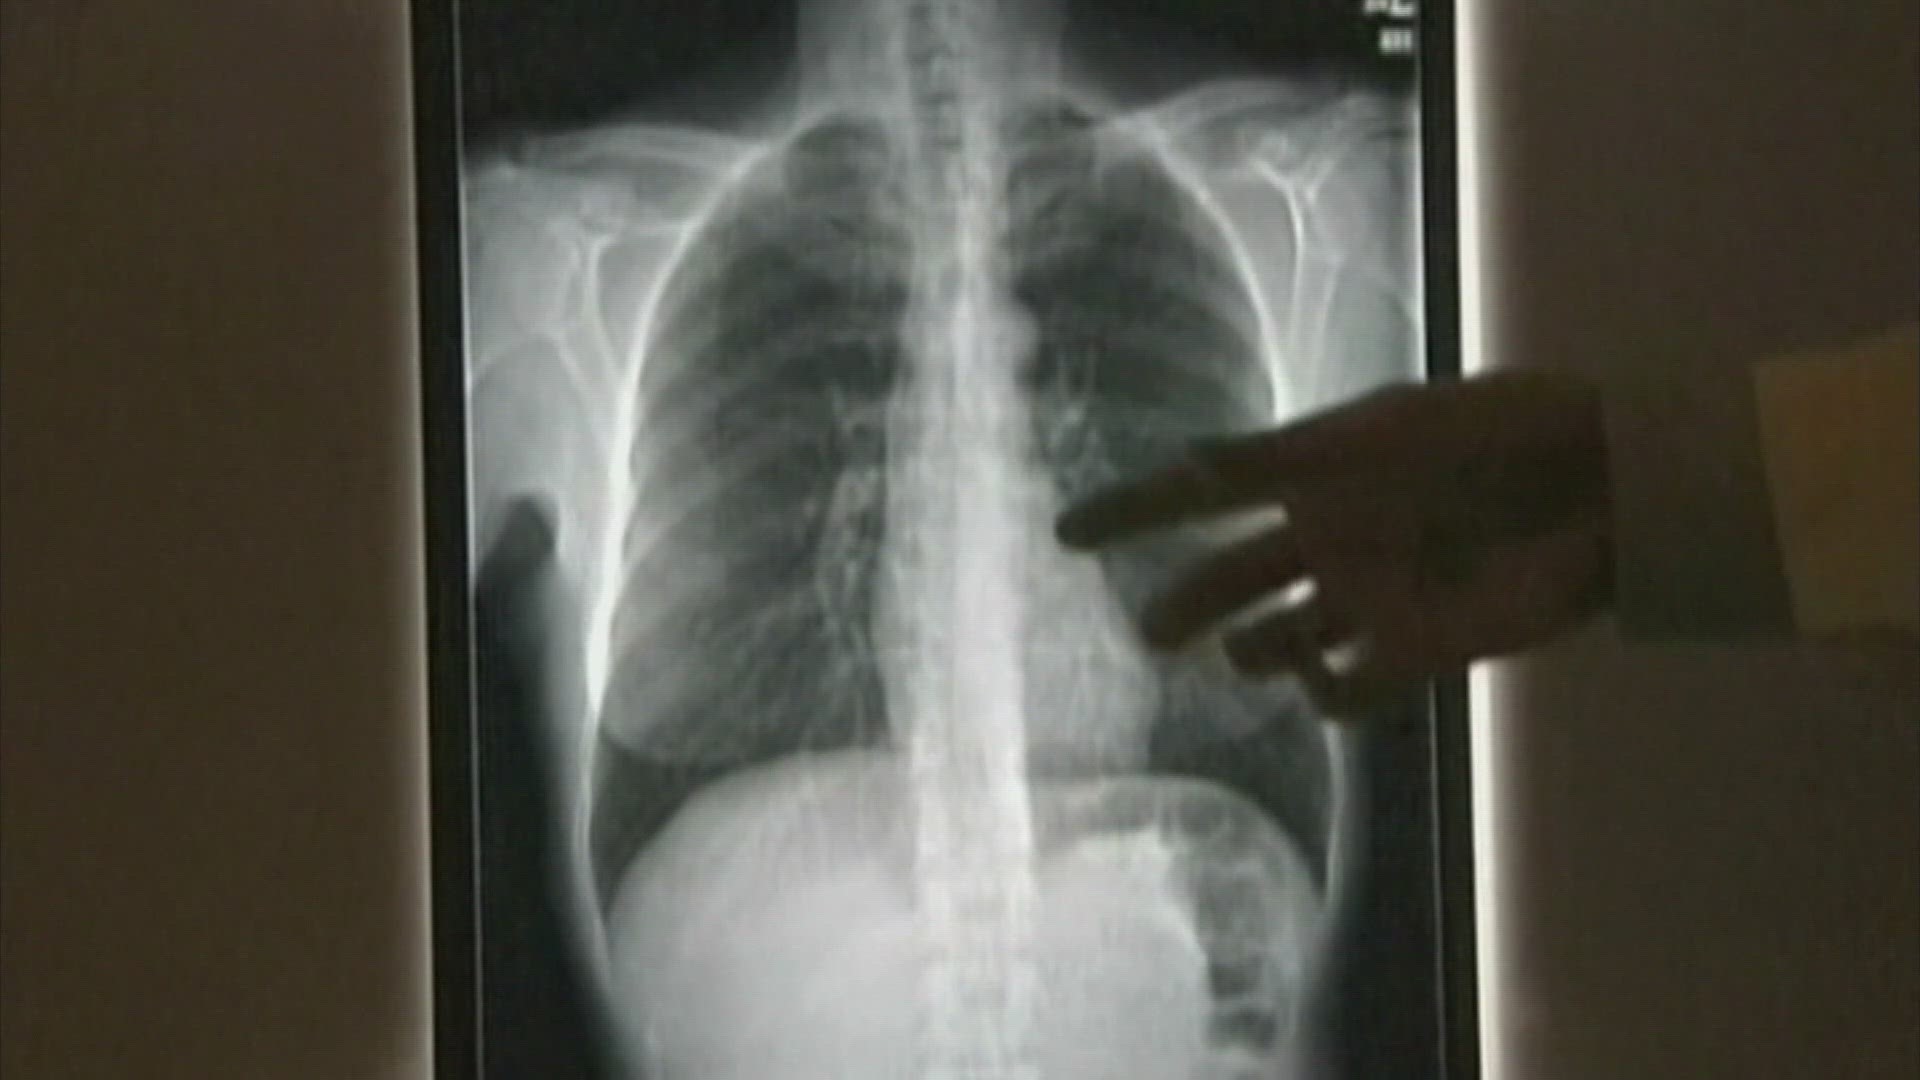 It's Lung Cancer Awareness Month and we're taking a look at the increased cases in lung cancer in women.